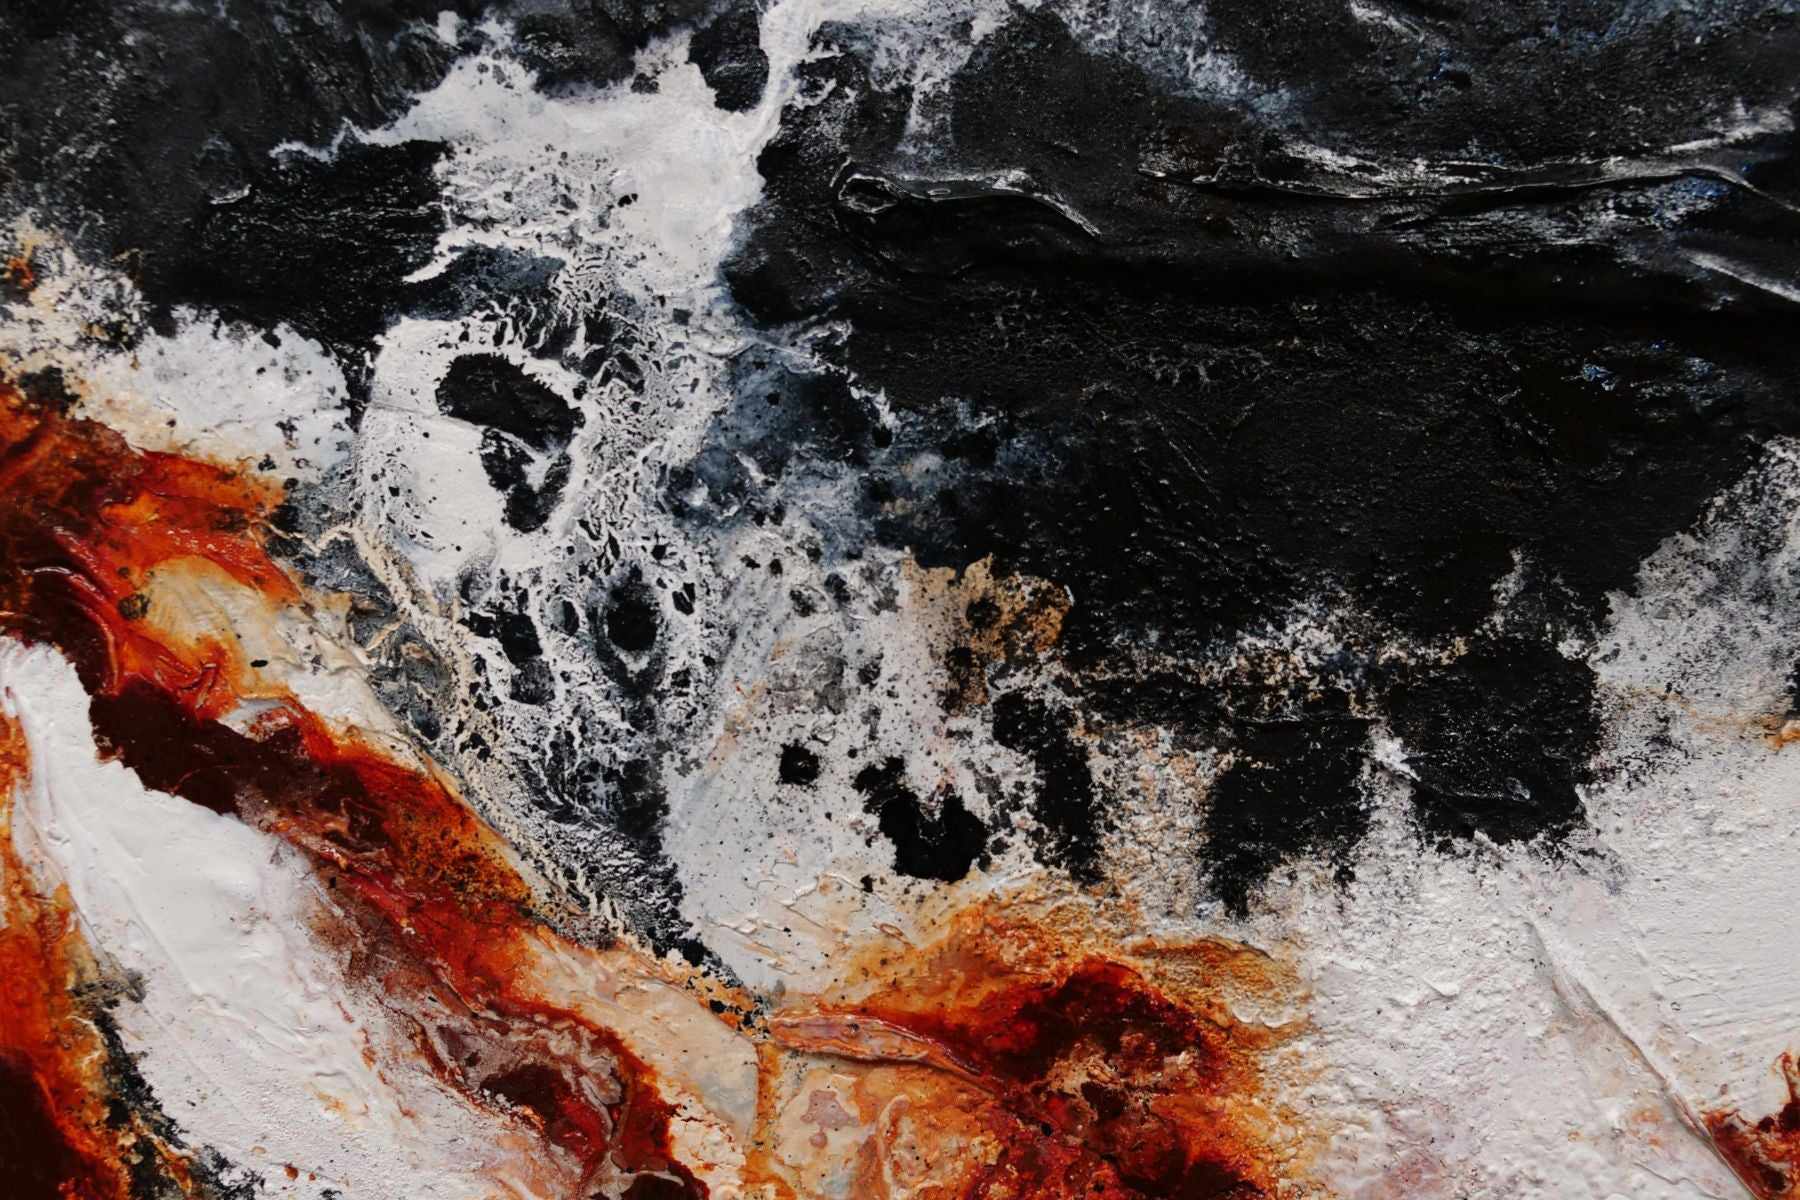 Slated Licorice and Ice 250cm x 150cm Black Oxide Textured Abstract Painting (SOLD)